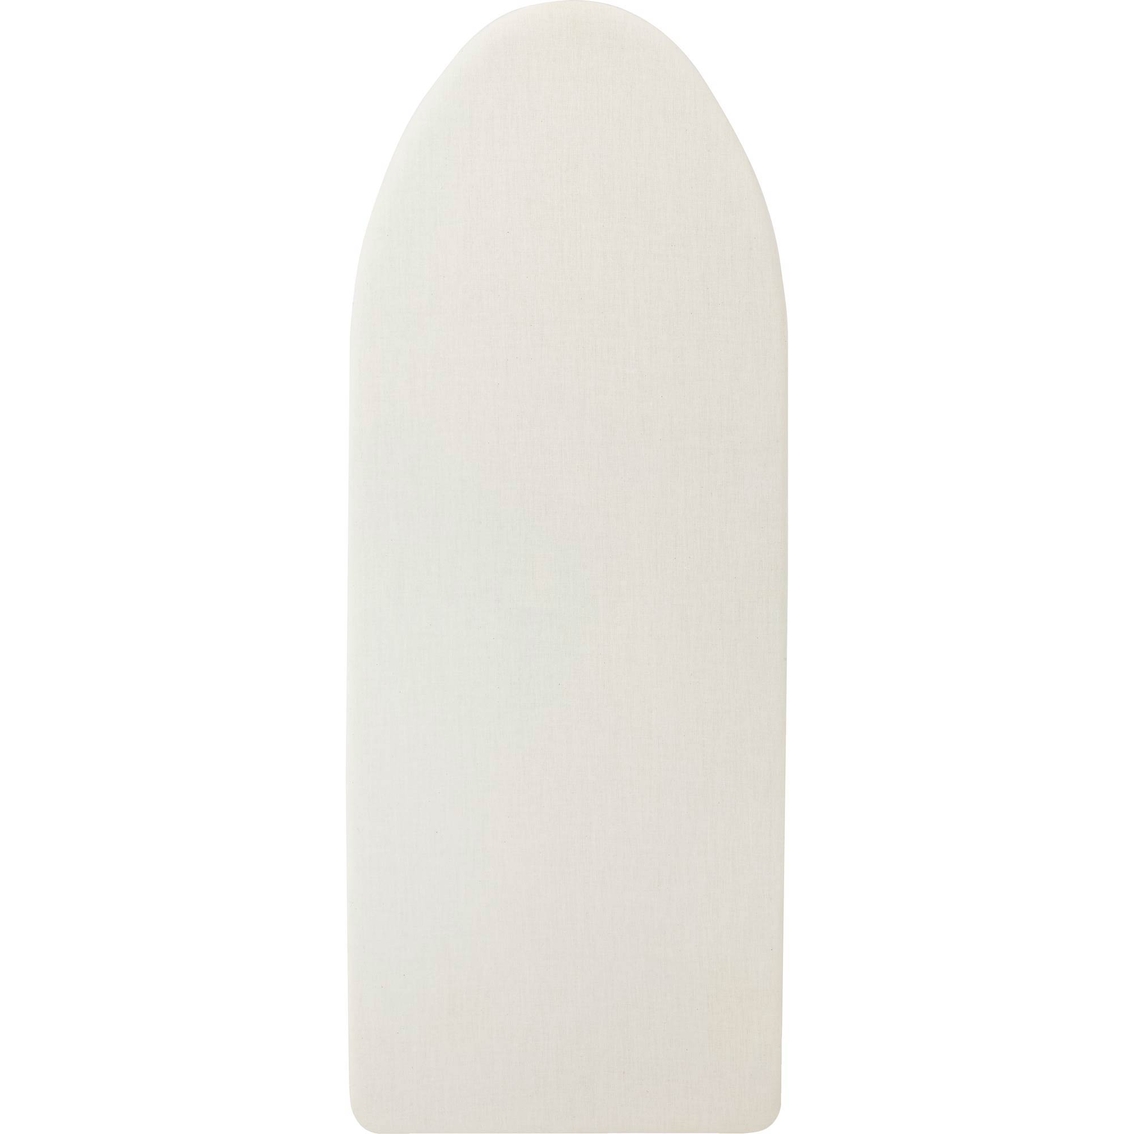 Whitmor Wood Tabletop Ironing Board - Image 4 of 5